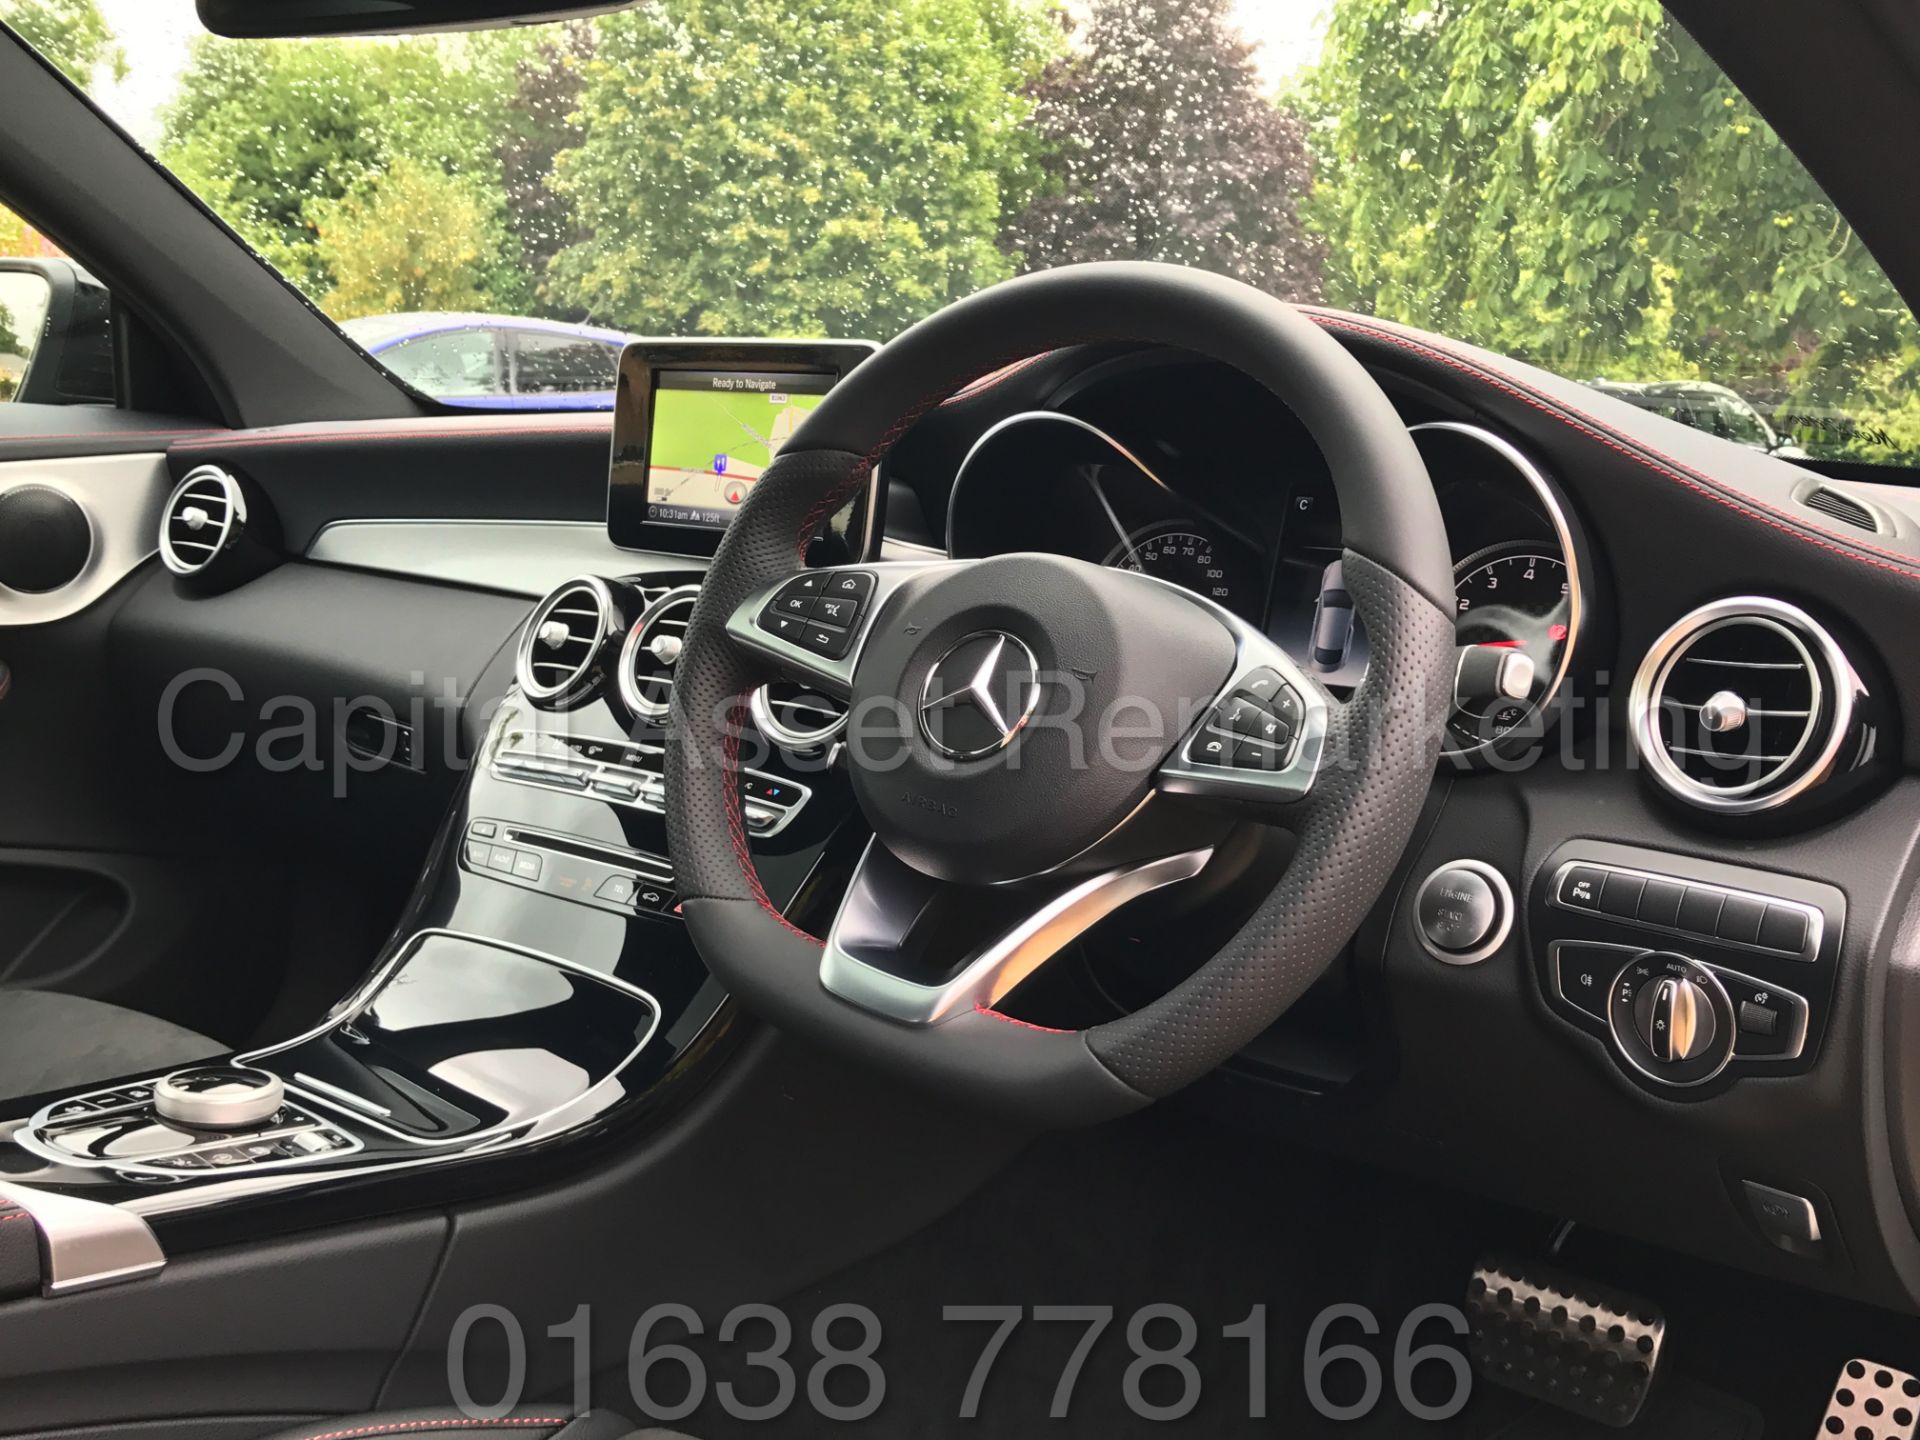 MEREDES-BENZ C43 AMG PREMIUM '4 MATIC' COUPE (2017) '9-G AUTO - LEATHER - SAT NAV' **FULLY LOADED** - Image 38 of 57